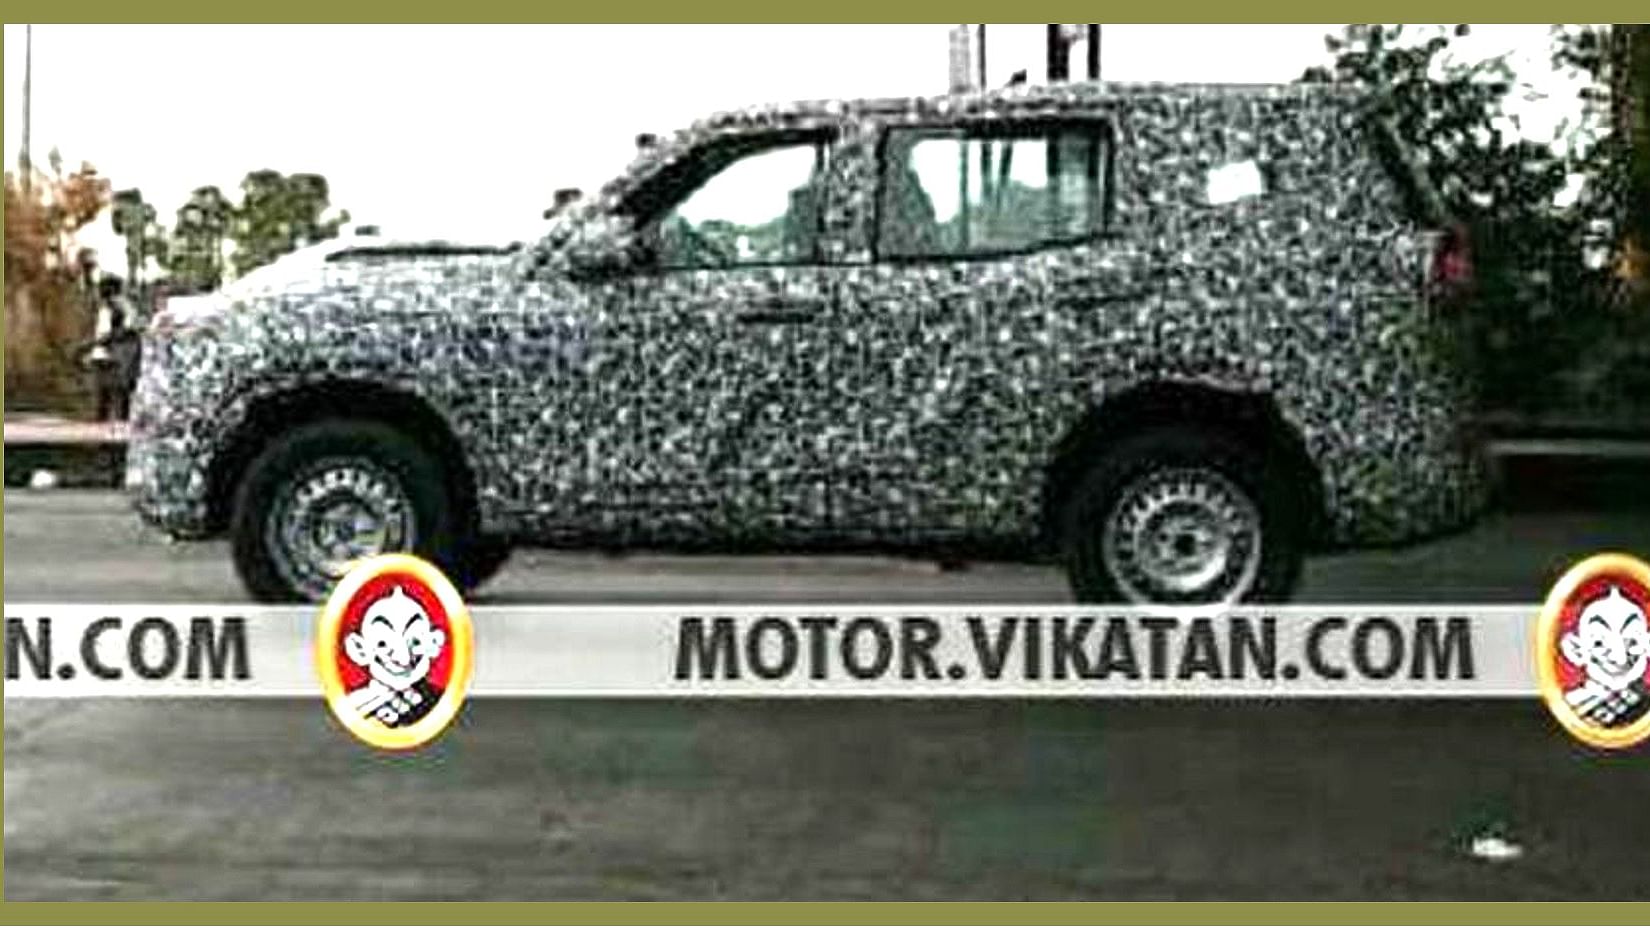 The 2020 Mahindra Scorpio has been spotted testing near Chennai for the first time.